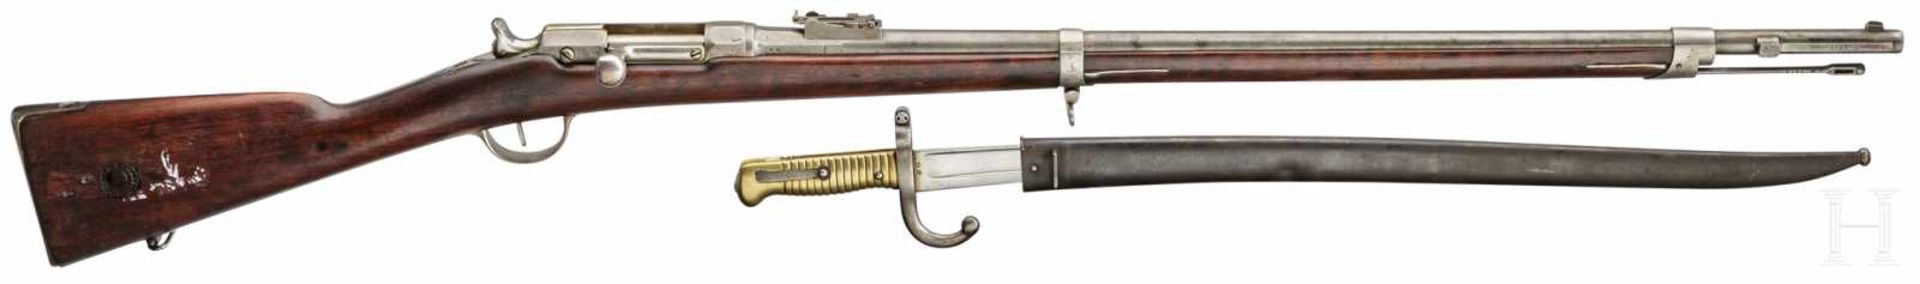 An Infantry Rifle Chassepot M 1866